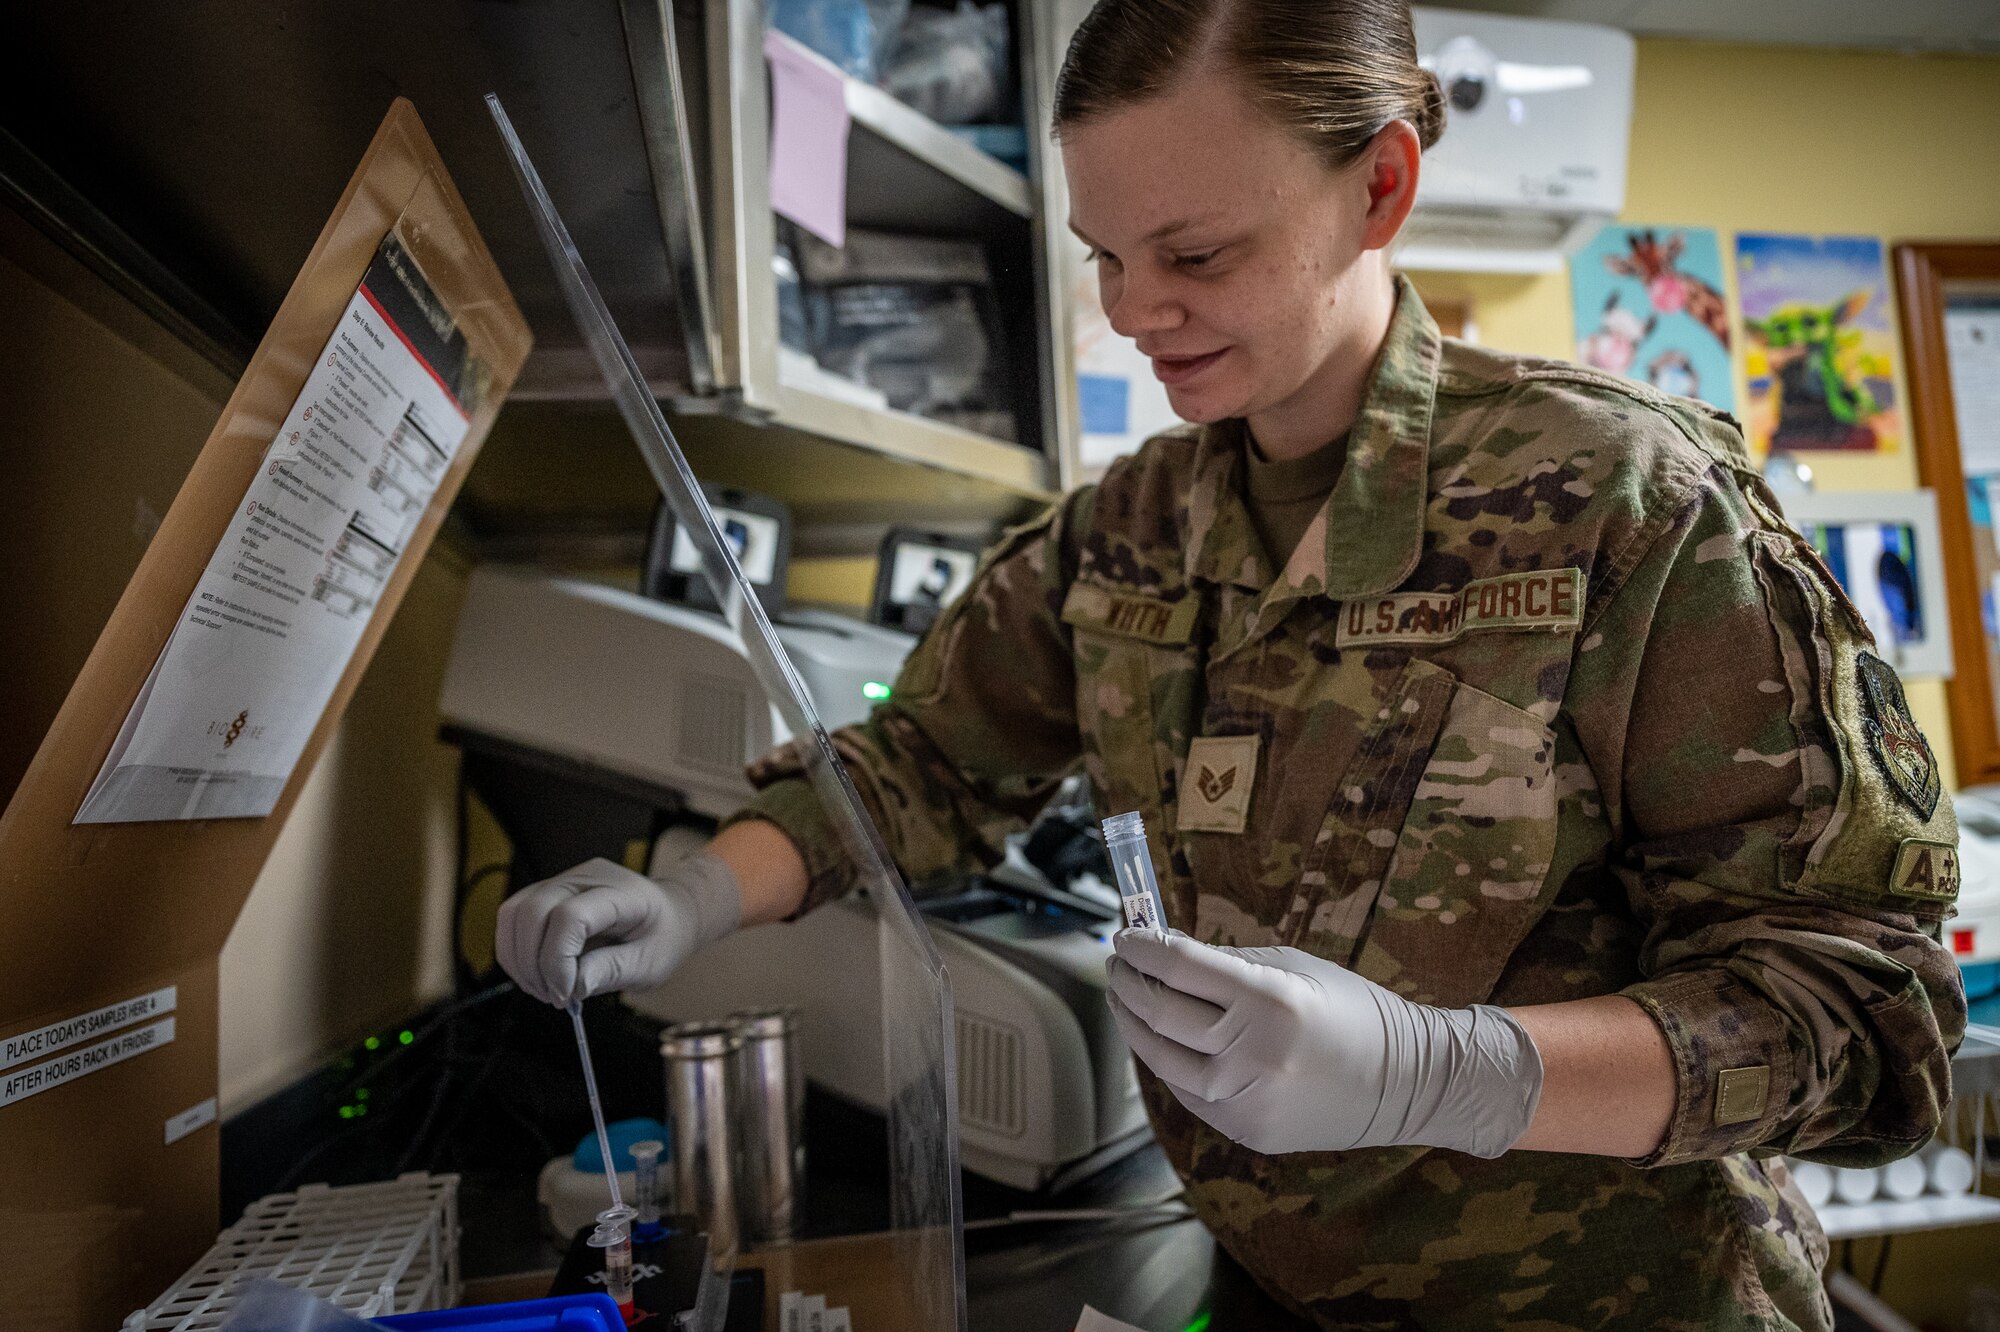 U.S. Air Force Staff Sgt. Kiersten Wirth, 332d Expeditionary Medical Group medical technician, processes a COVID-19 test in the 332d EMDG laboratory at an undisclosed location in Southwest Asia, April 6, 2022. Wirth helps in the lab and with X-rays as a multi-capable Airman within the 332d EMDG. (U.S. Air Force photo by Master Sgt. Christopher Parr)